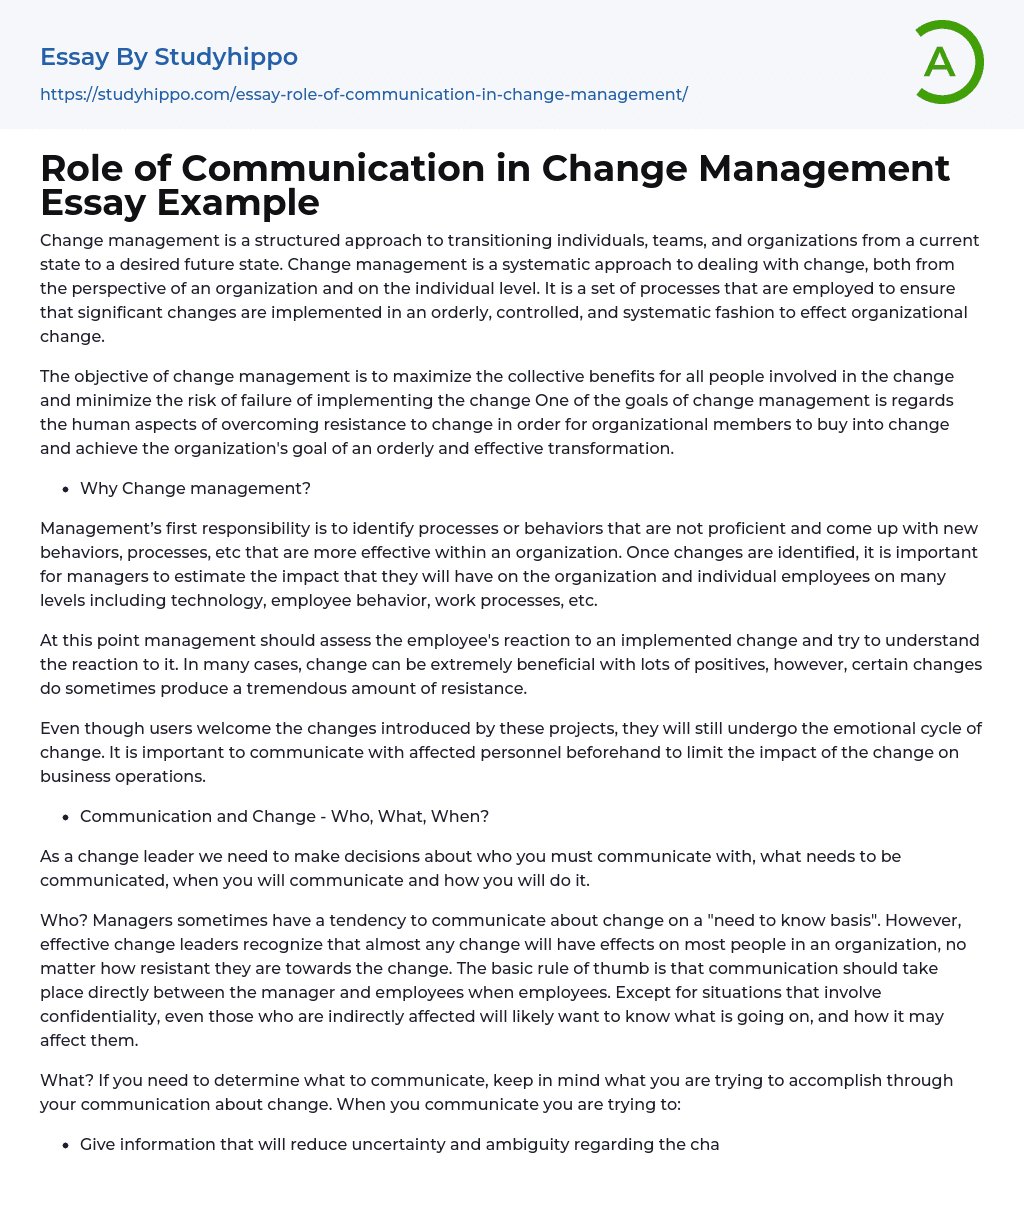 Role of Communication in Change Management Essay Example